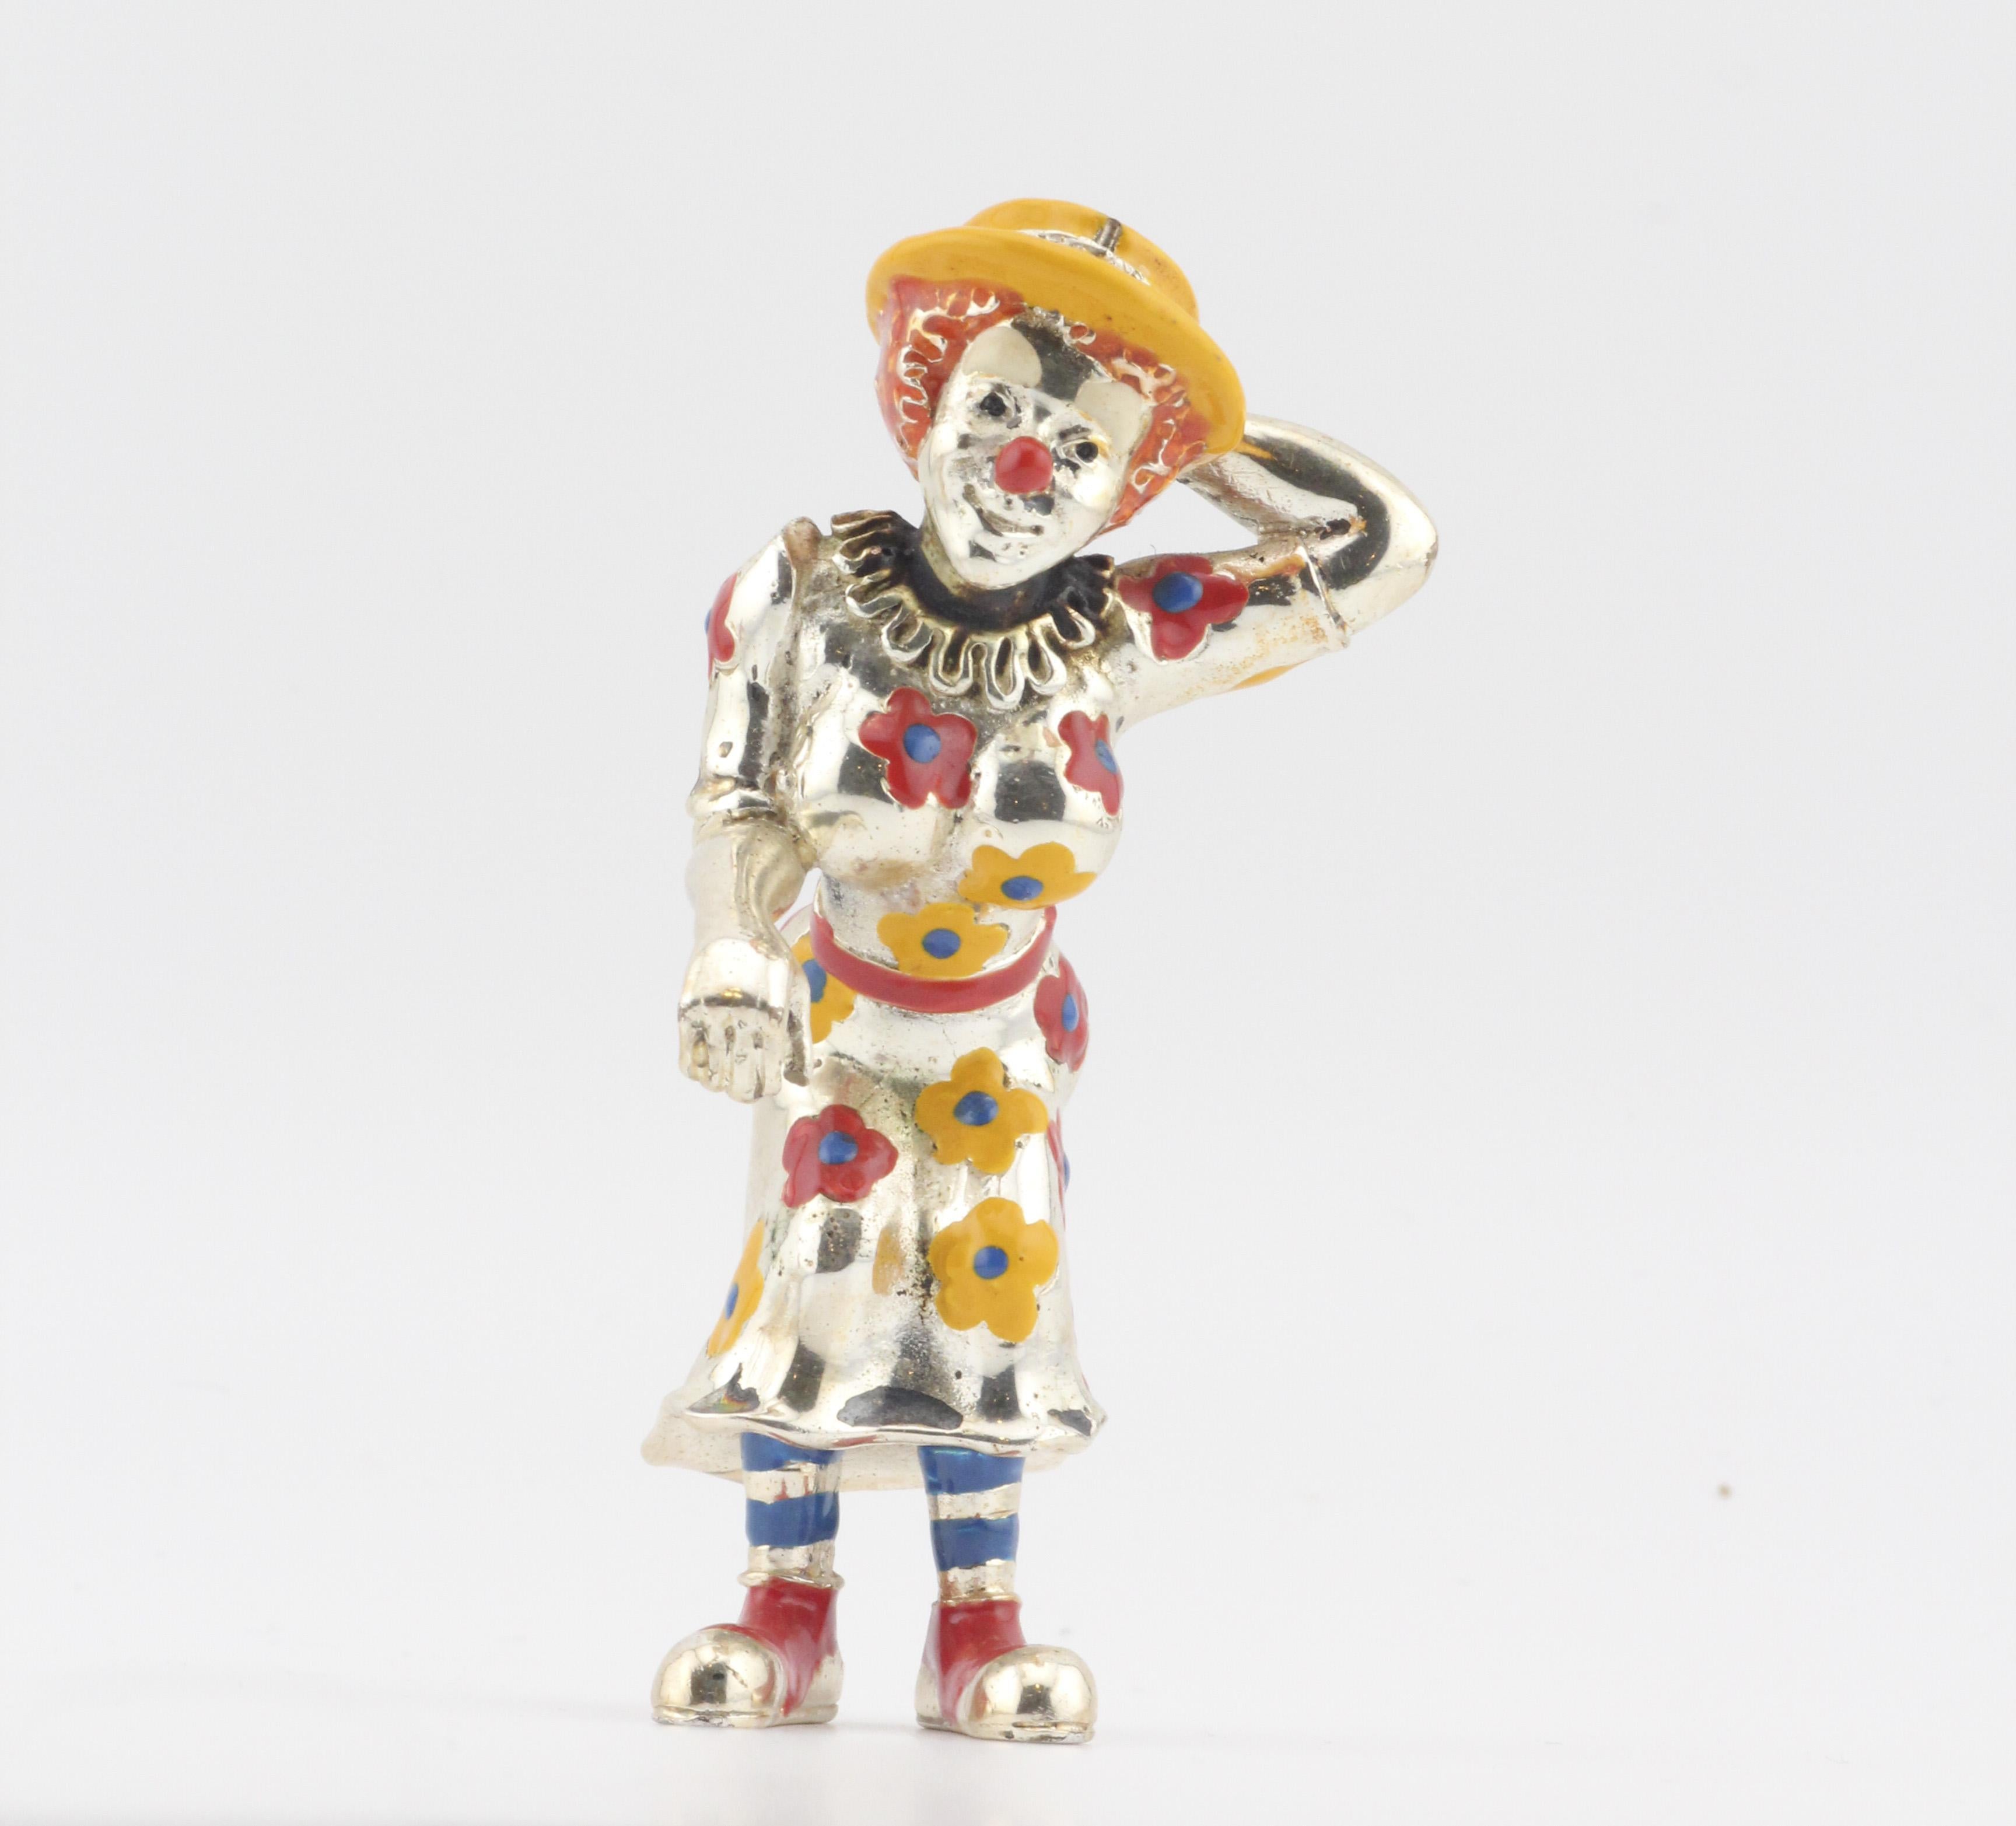 Tiffany & Co. Silver & Enamel Circus Clown Mother & Baby in Carriage Figurine 3